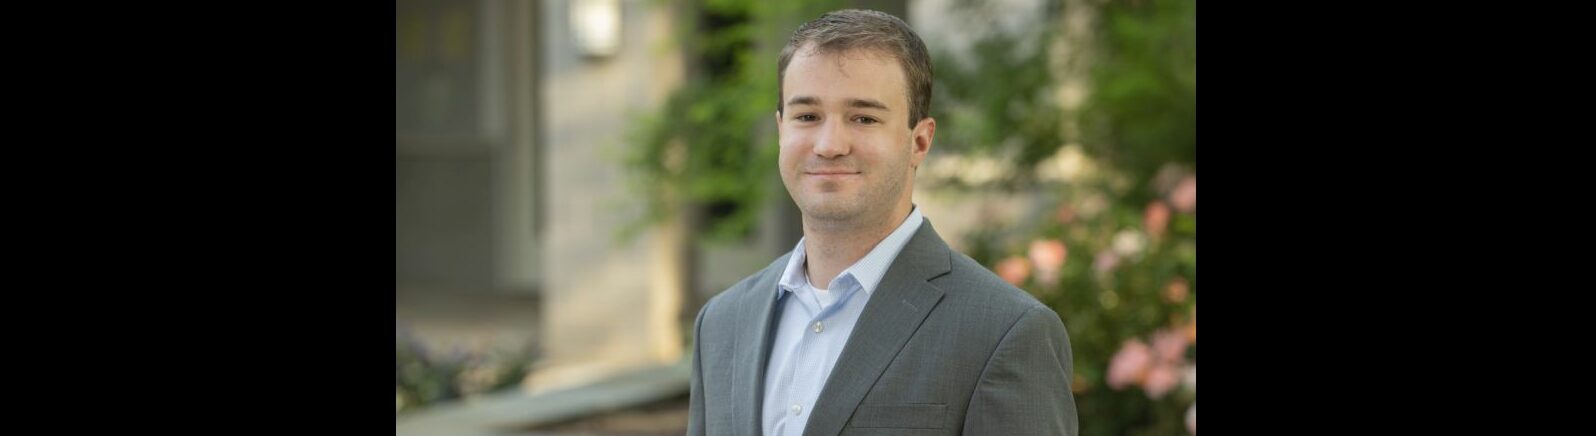 wjcb welcomes Jake Lewis to liability litigation practice in the Greenville Office